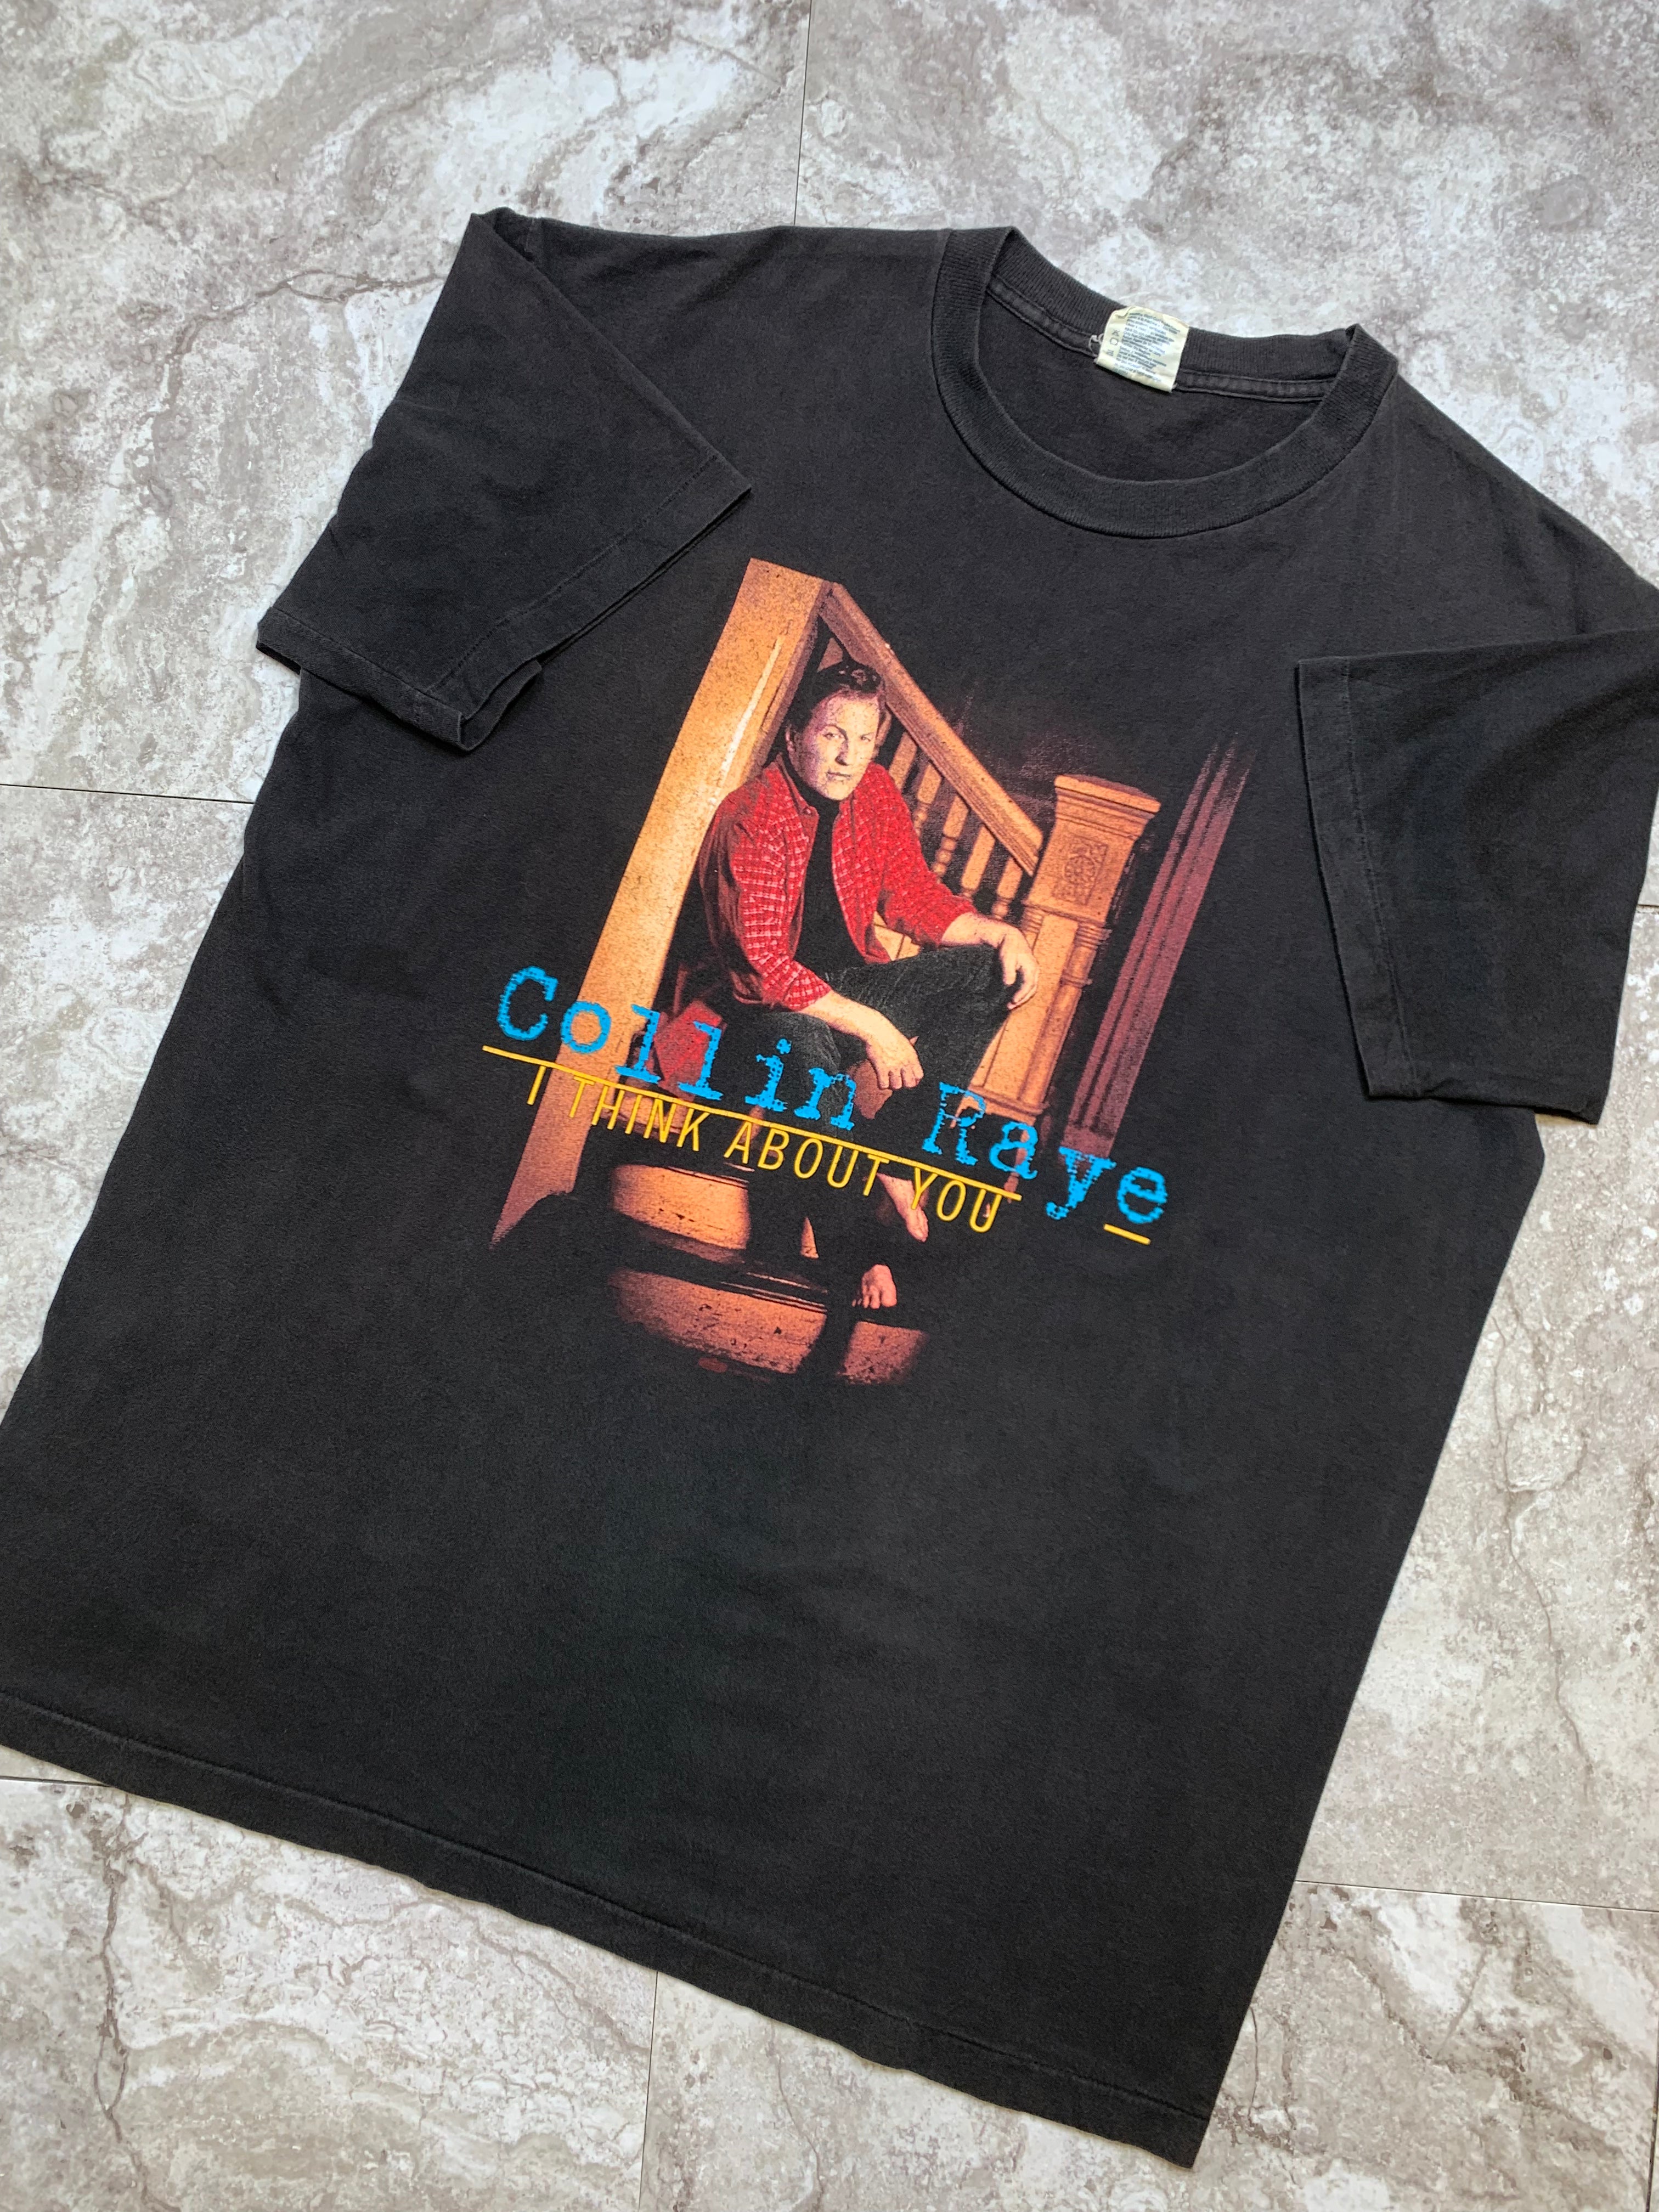 Collin Raye “I Think About You” ‘96 Tour Tee